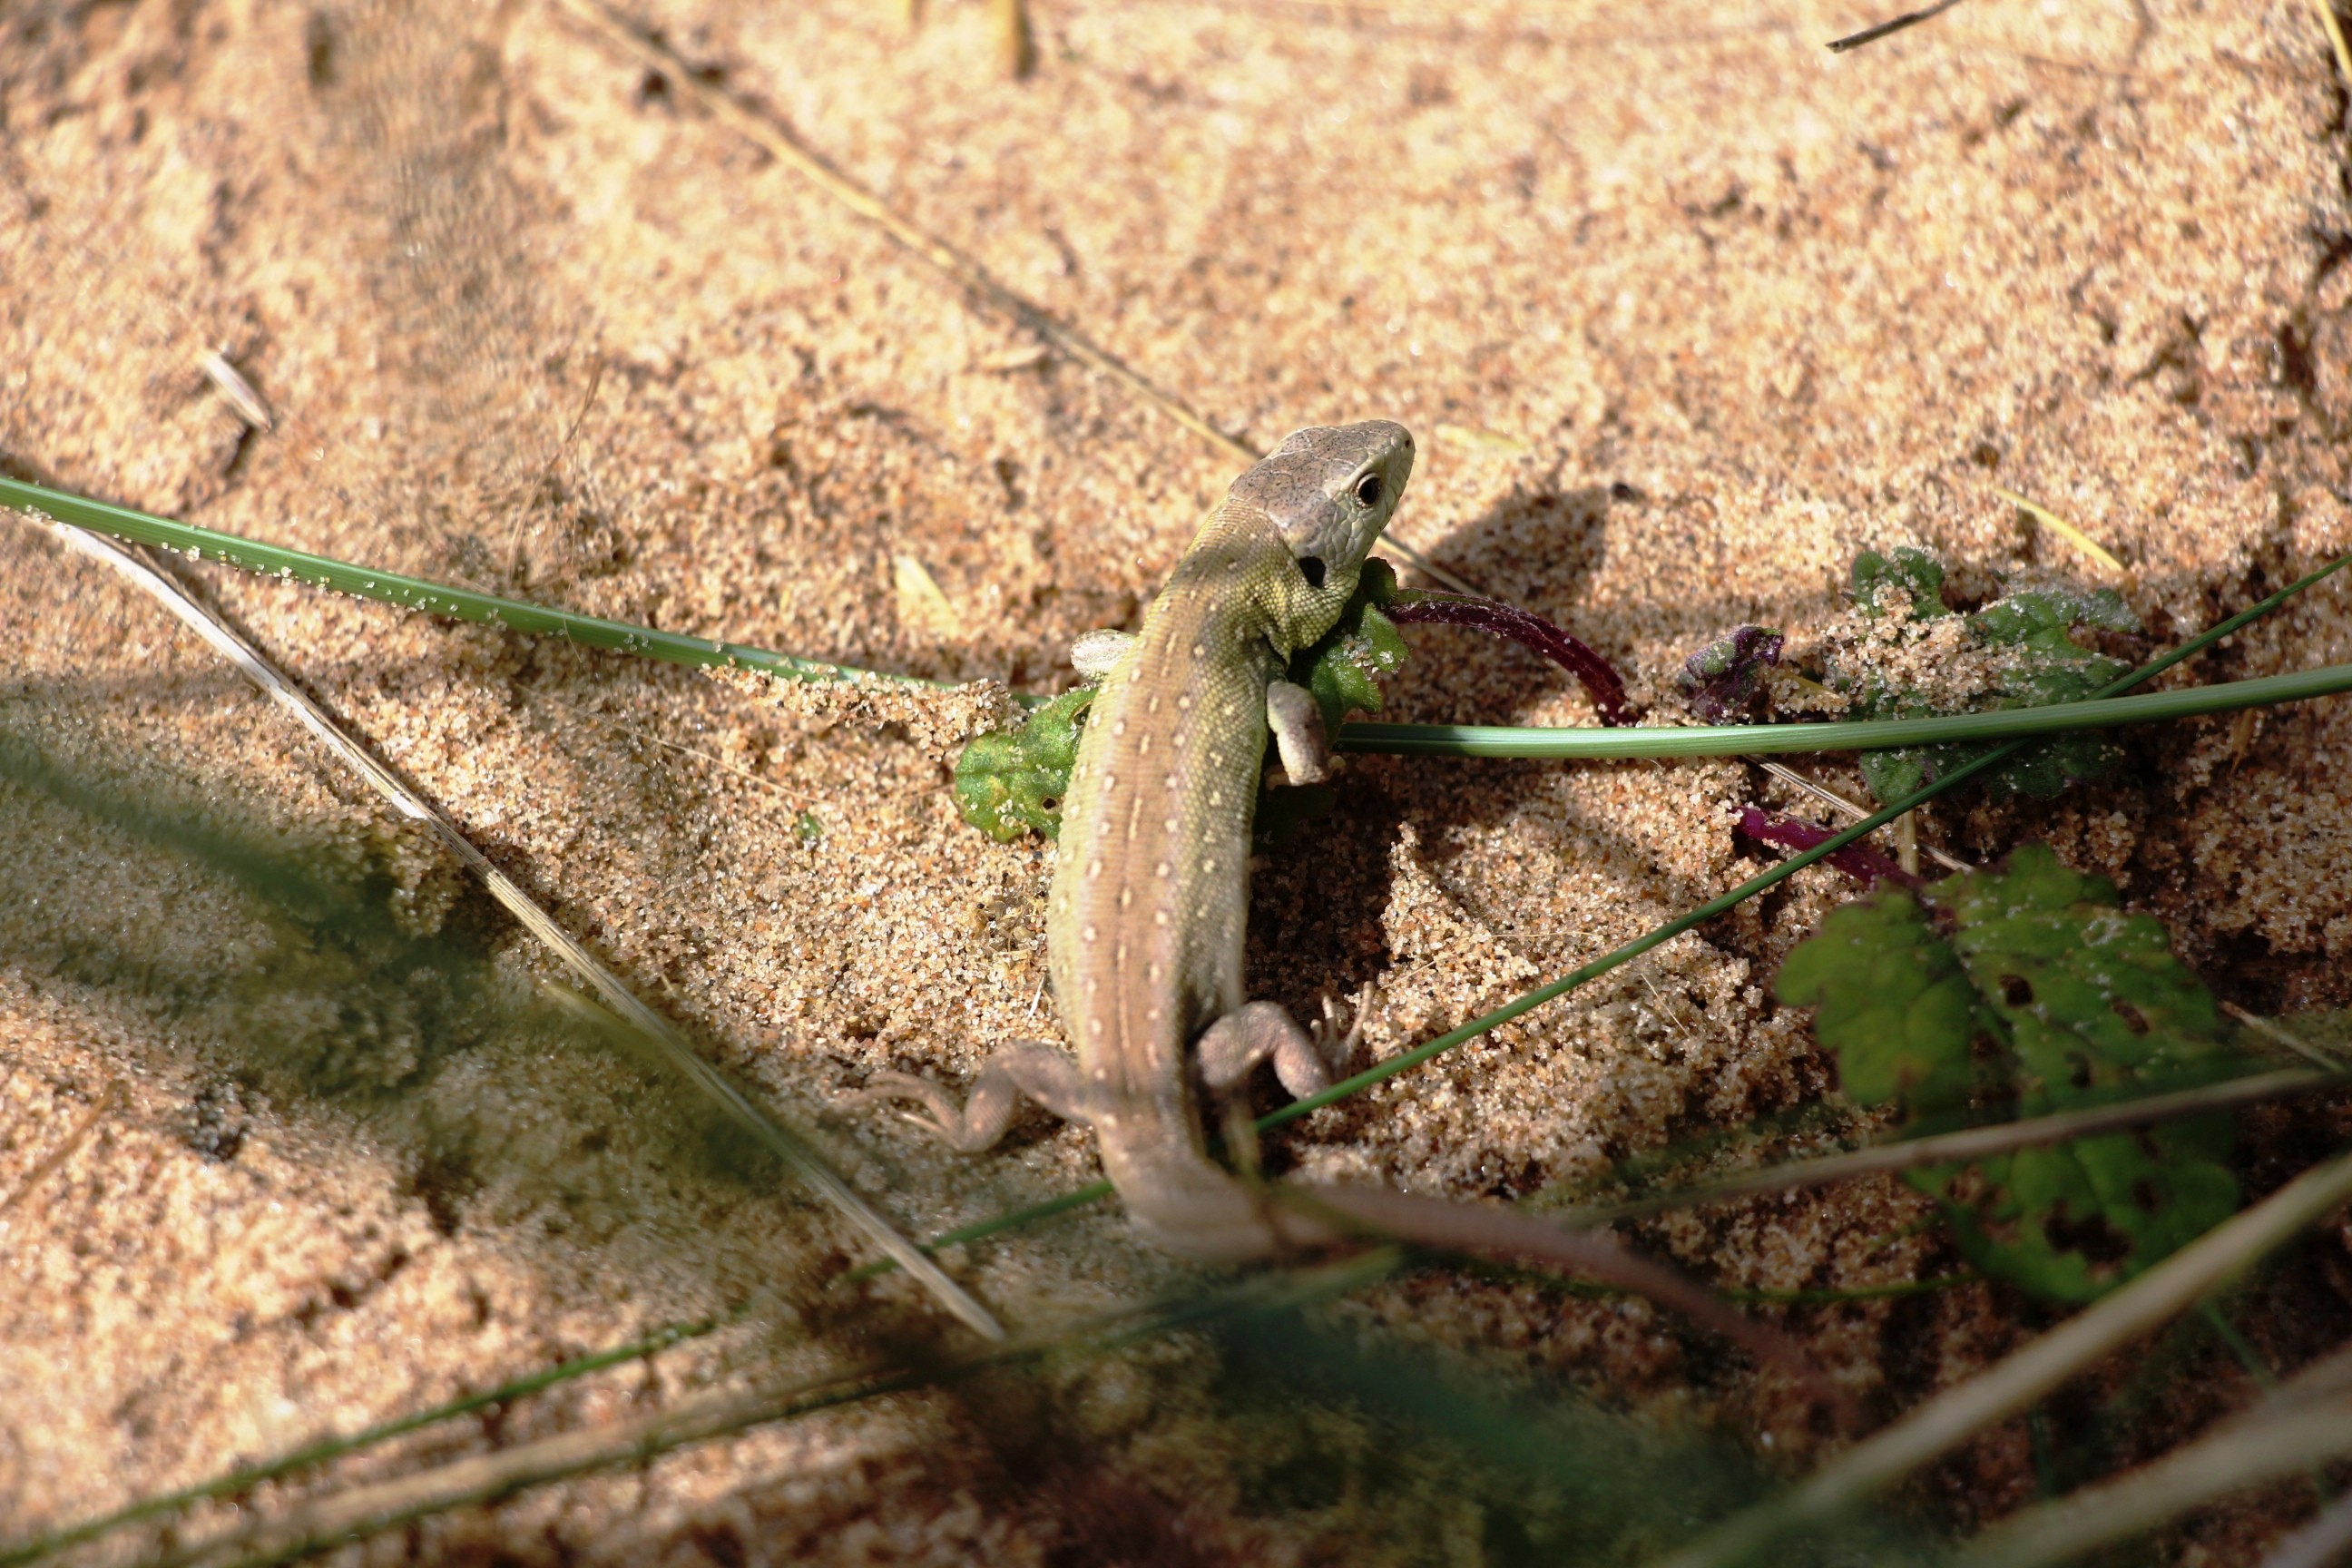 A lizard on the dunes after release. The lizards quickly found protection in the dense marram grass